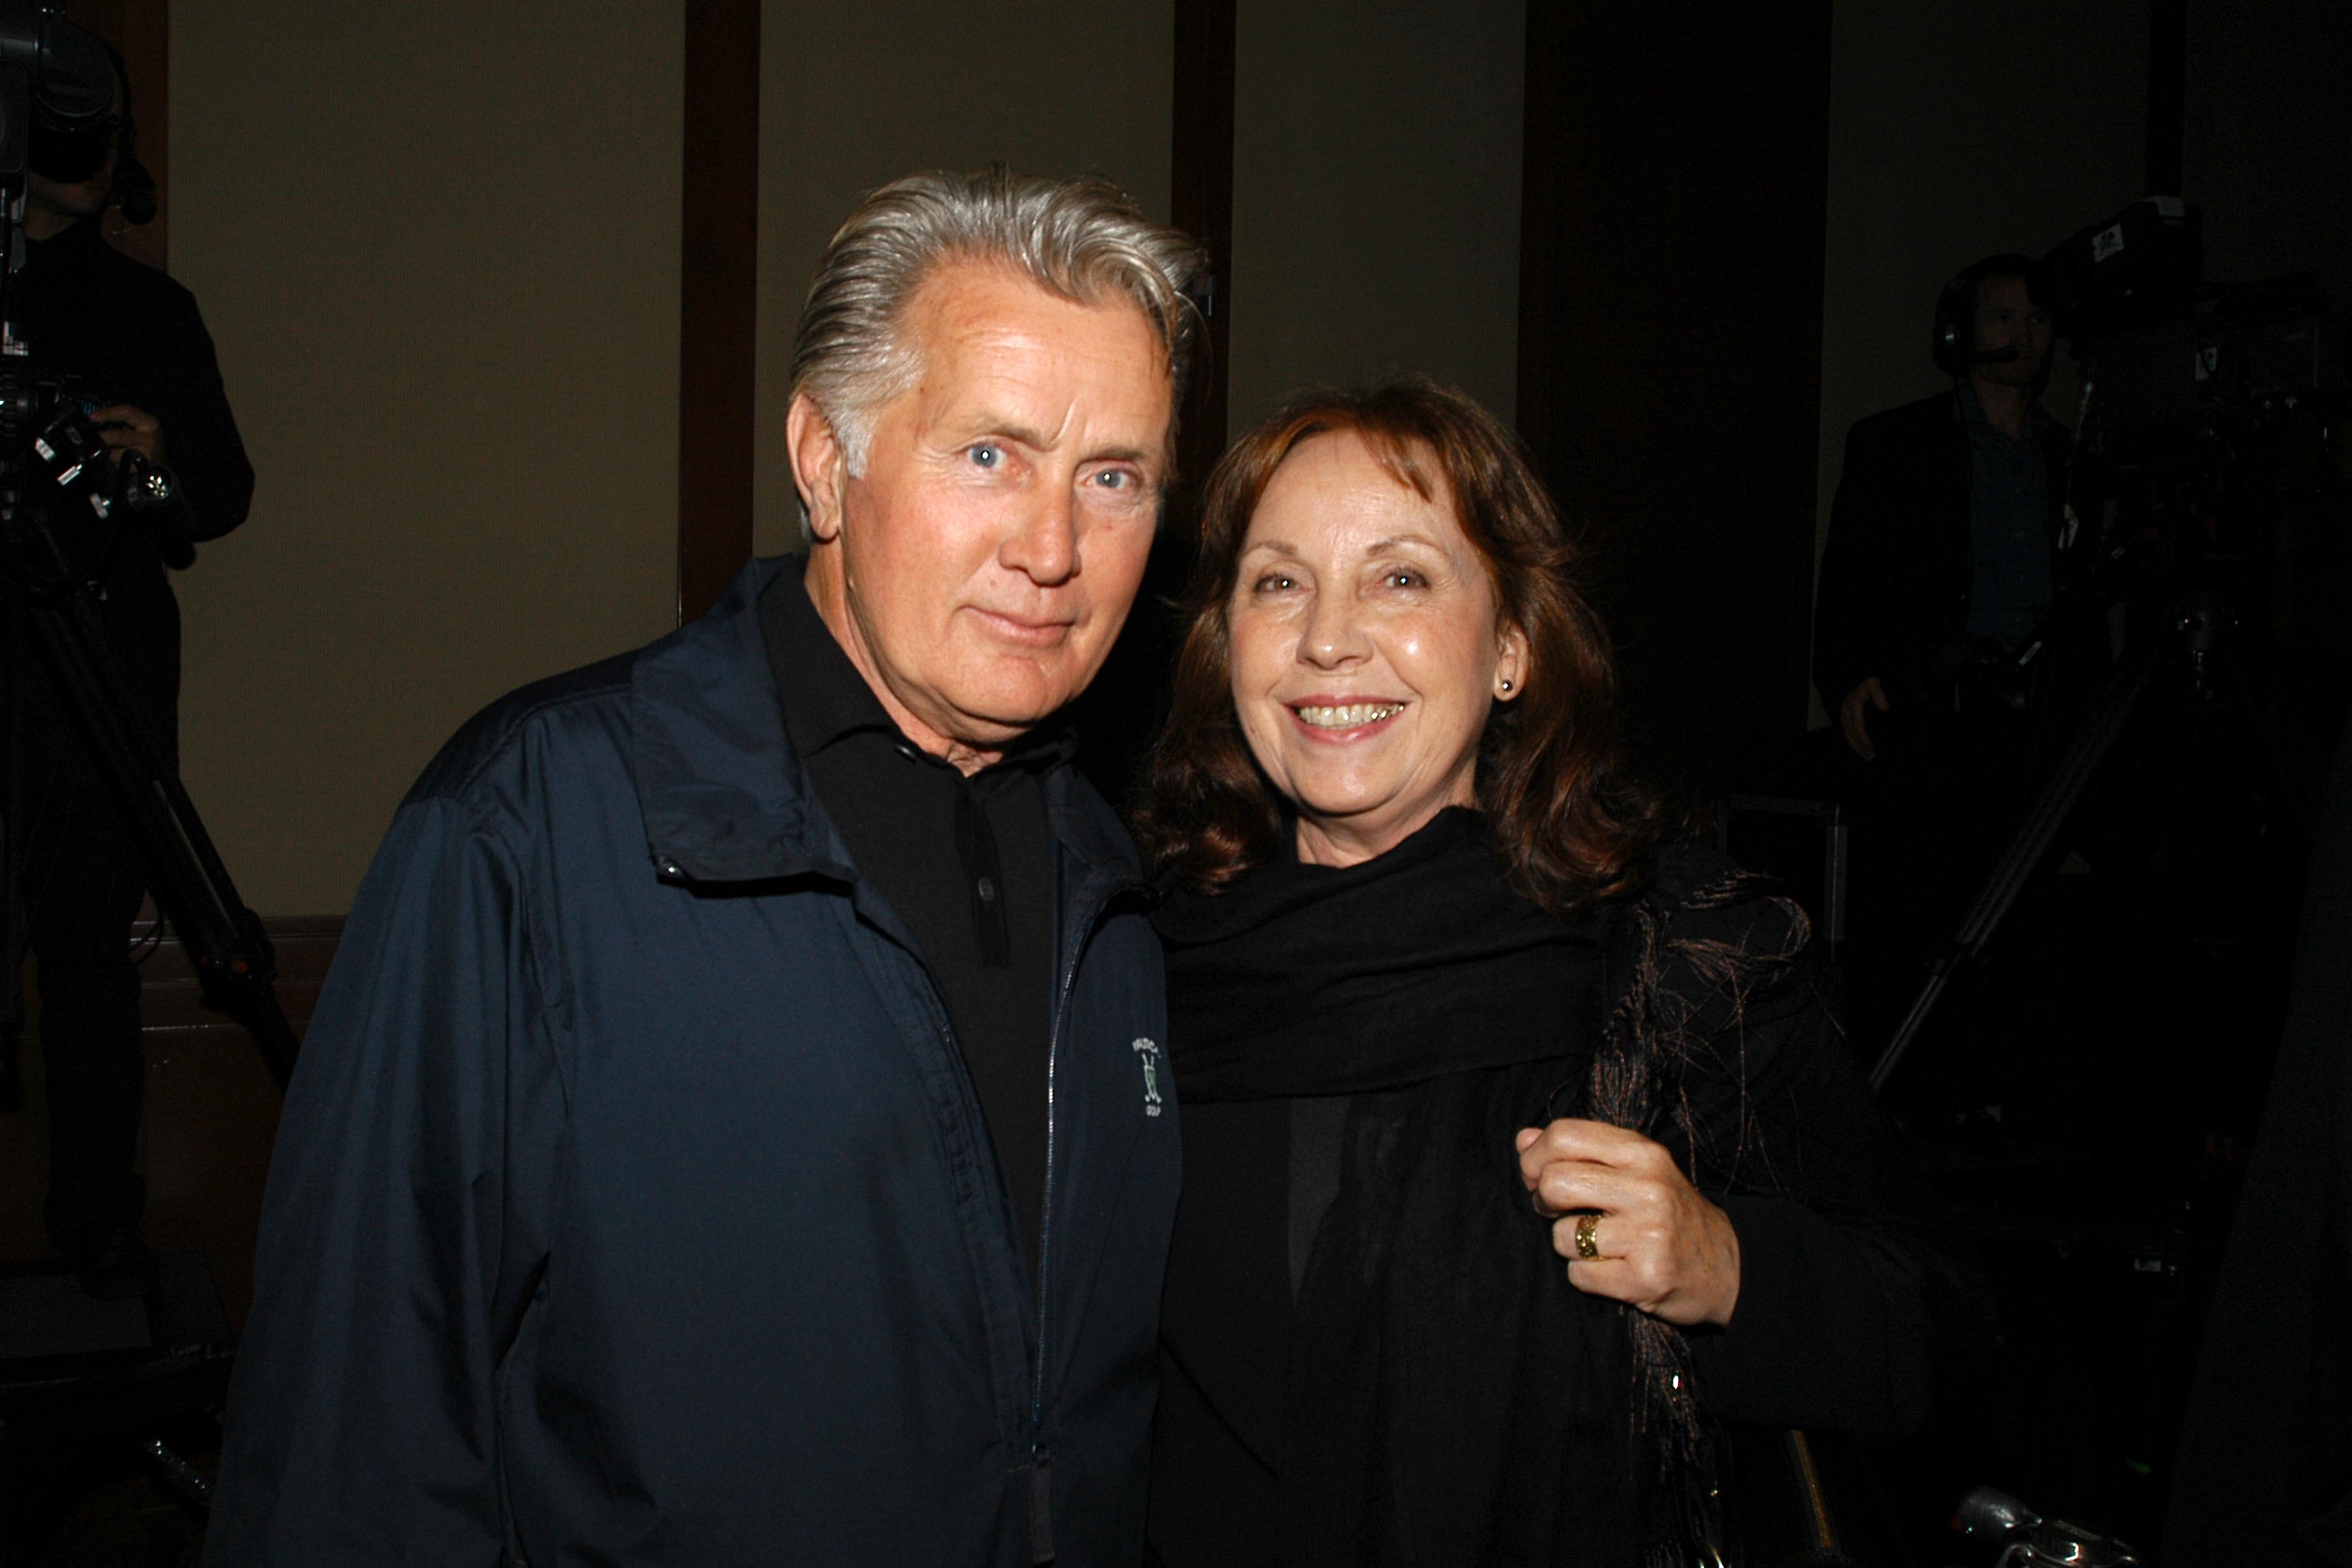 Martin Sheen and Janet Sheen attending the special premiere of Speak Truth To Power at Pier Sixty on October 6, 2006 in New York City. / Source: Getty Images